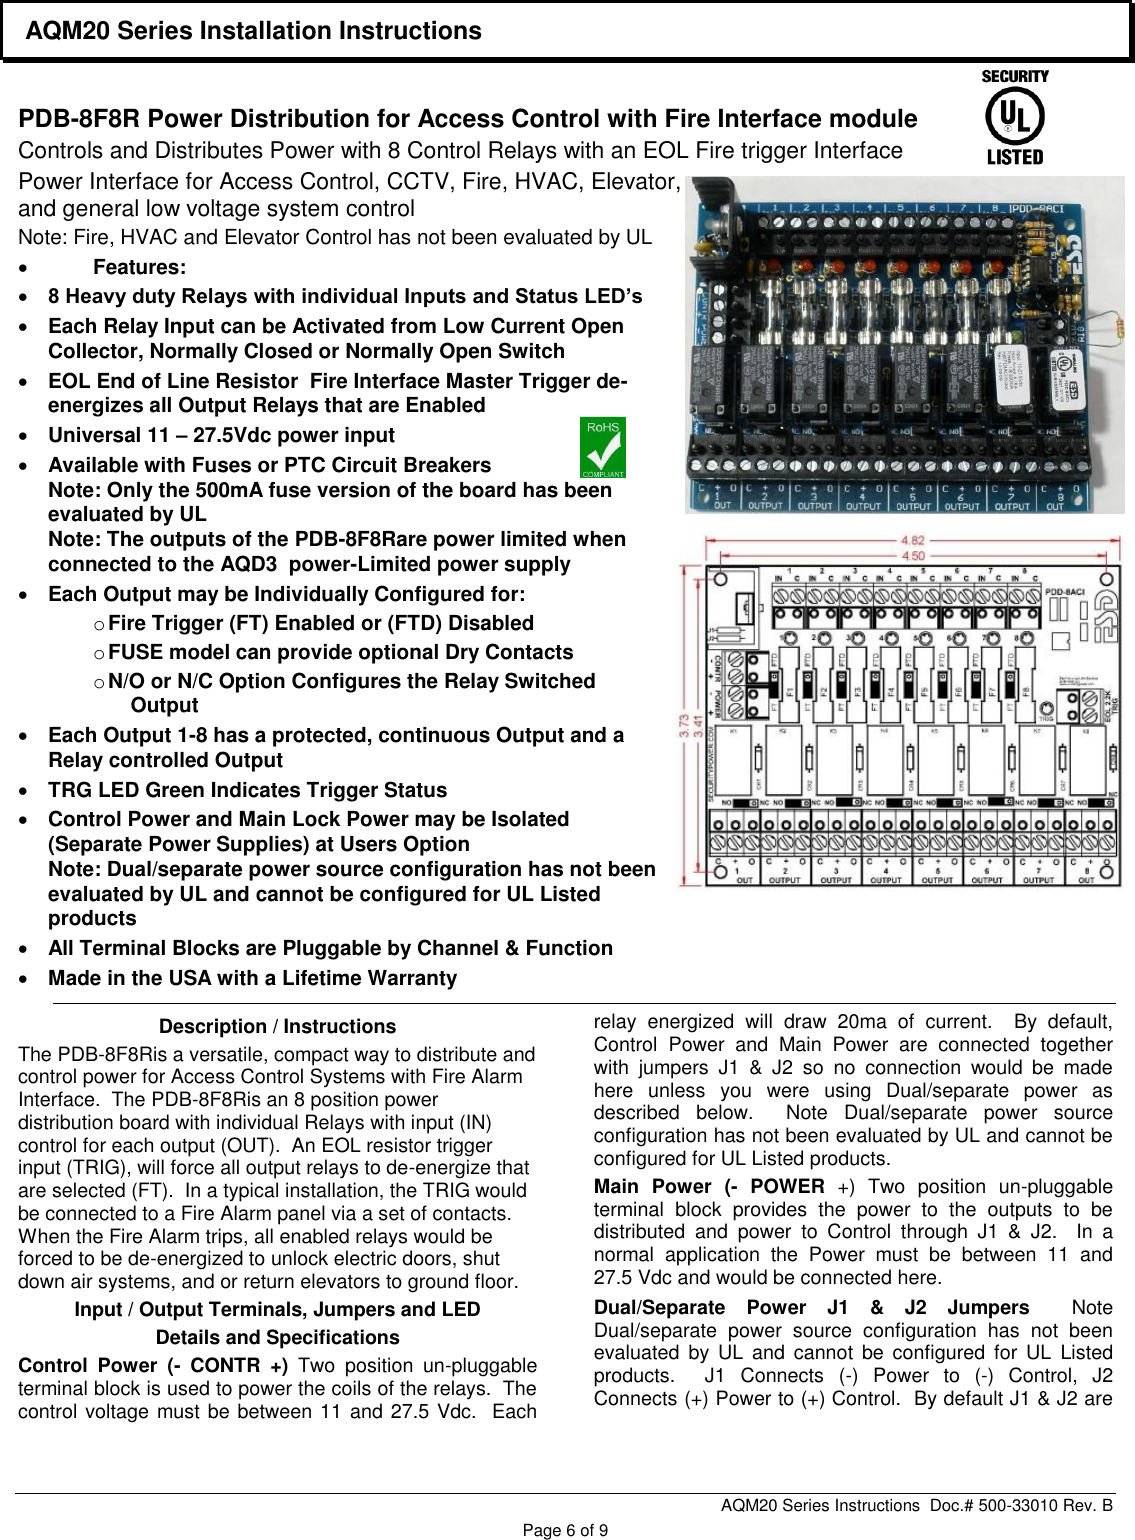 Page 6 of 8 - Securitron SPS-5 And SPS-10 Technical Sales Bulletin AQM-20 Installation Manual I 500-33010 B